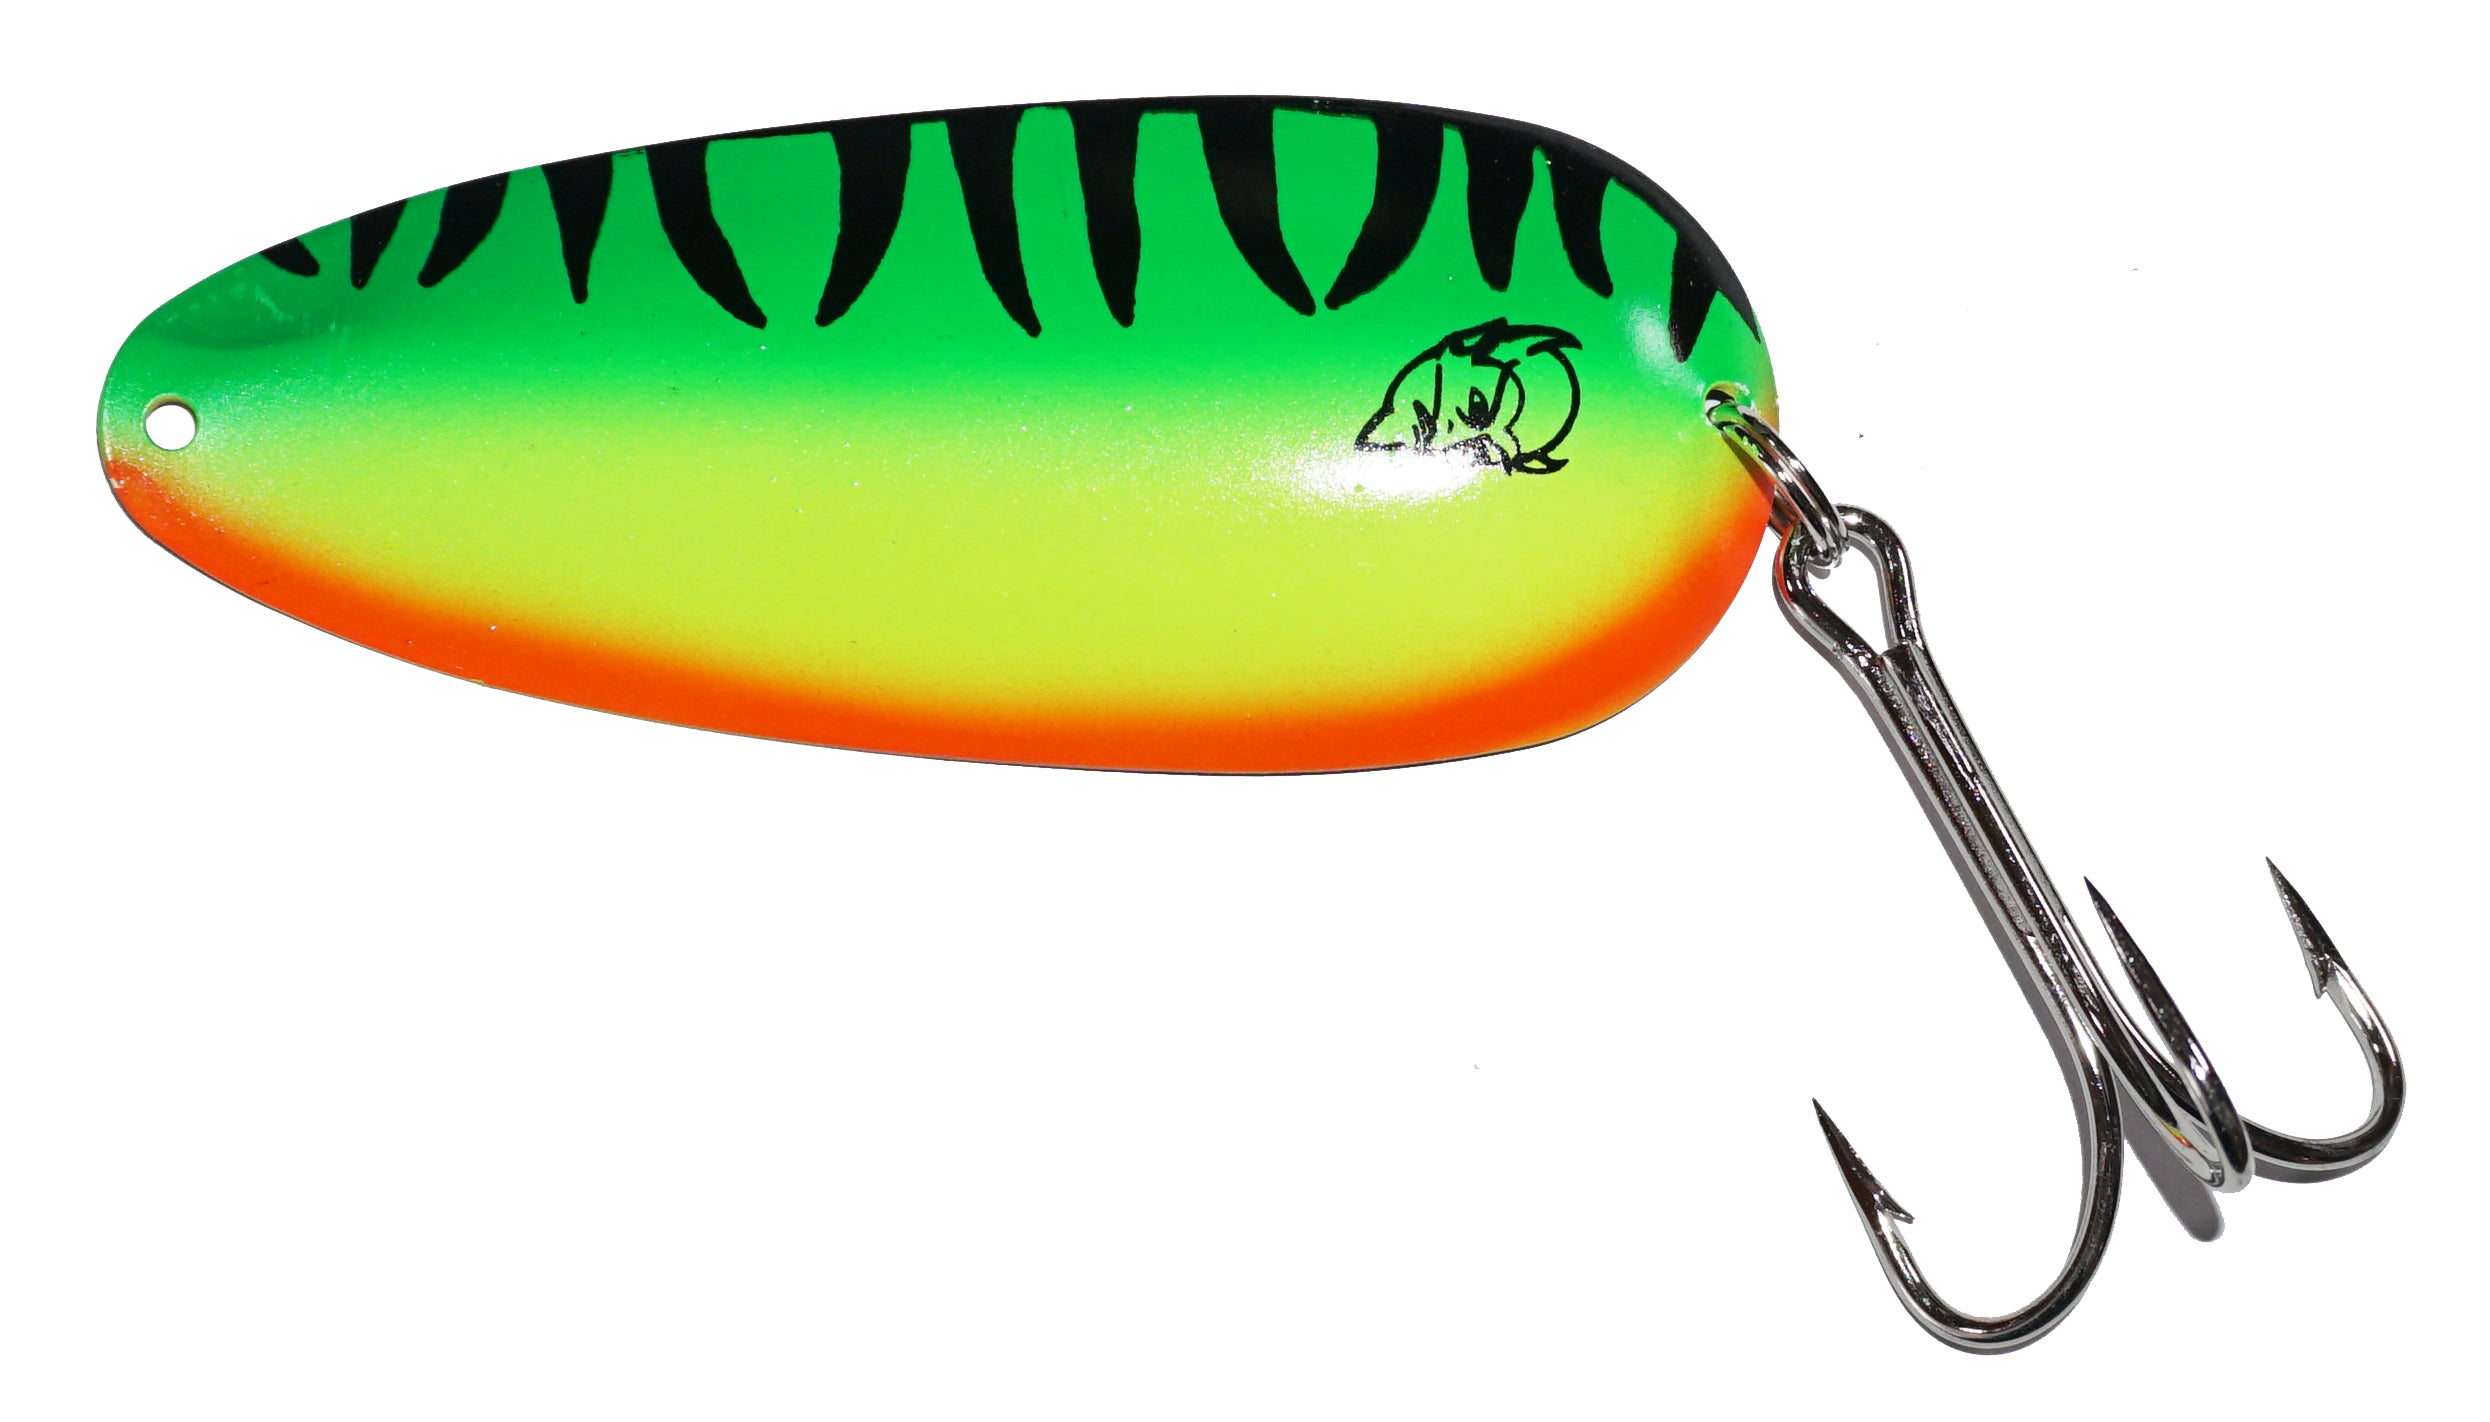  Eppinger Mfg. Co. 59 Dardevle Lure, Green/Yellow : Fishing  Spoons : Sports & Outdoors